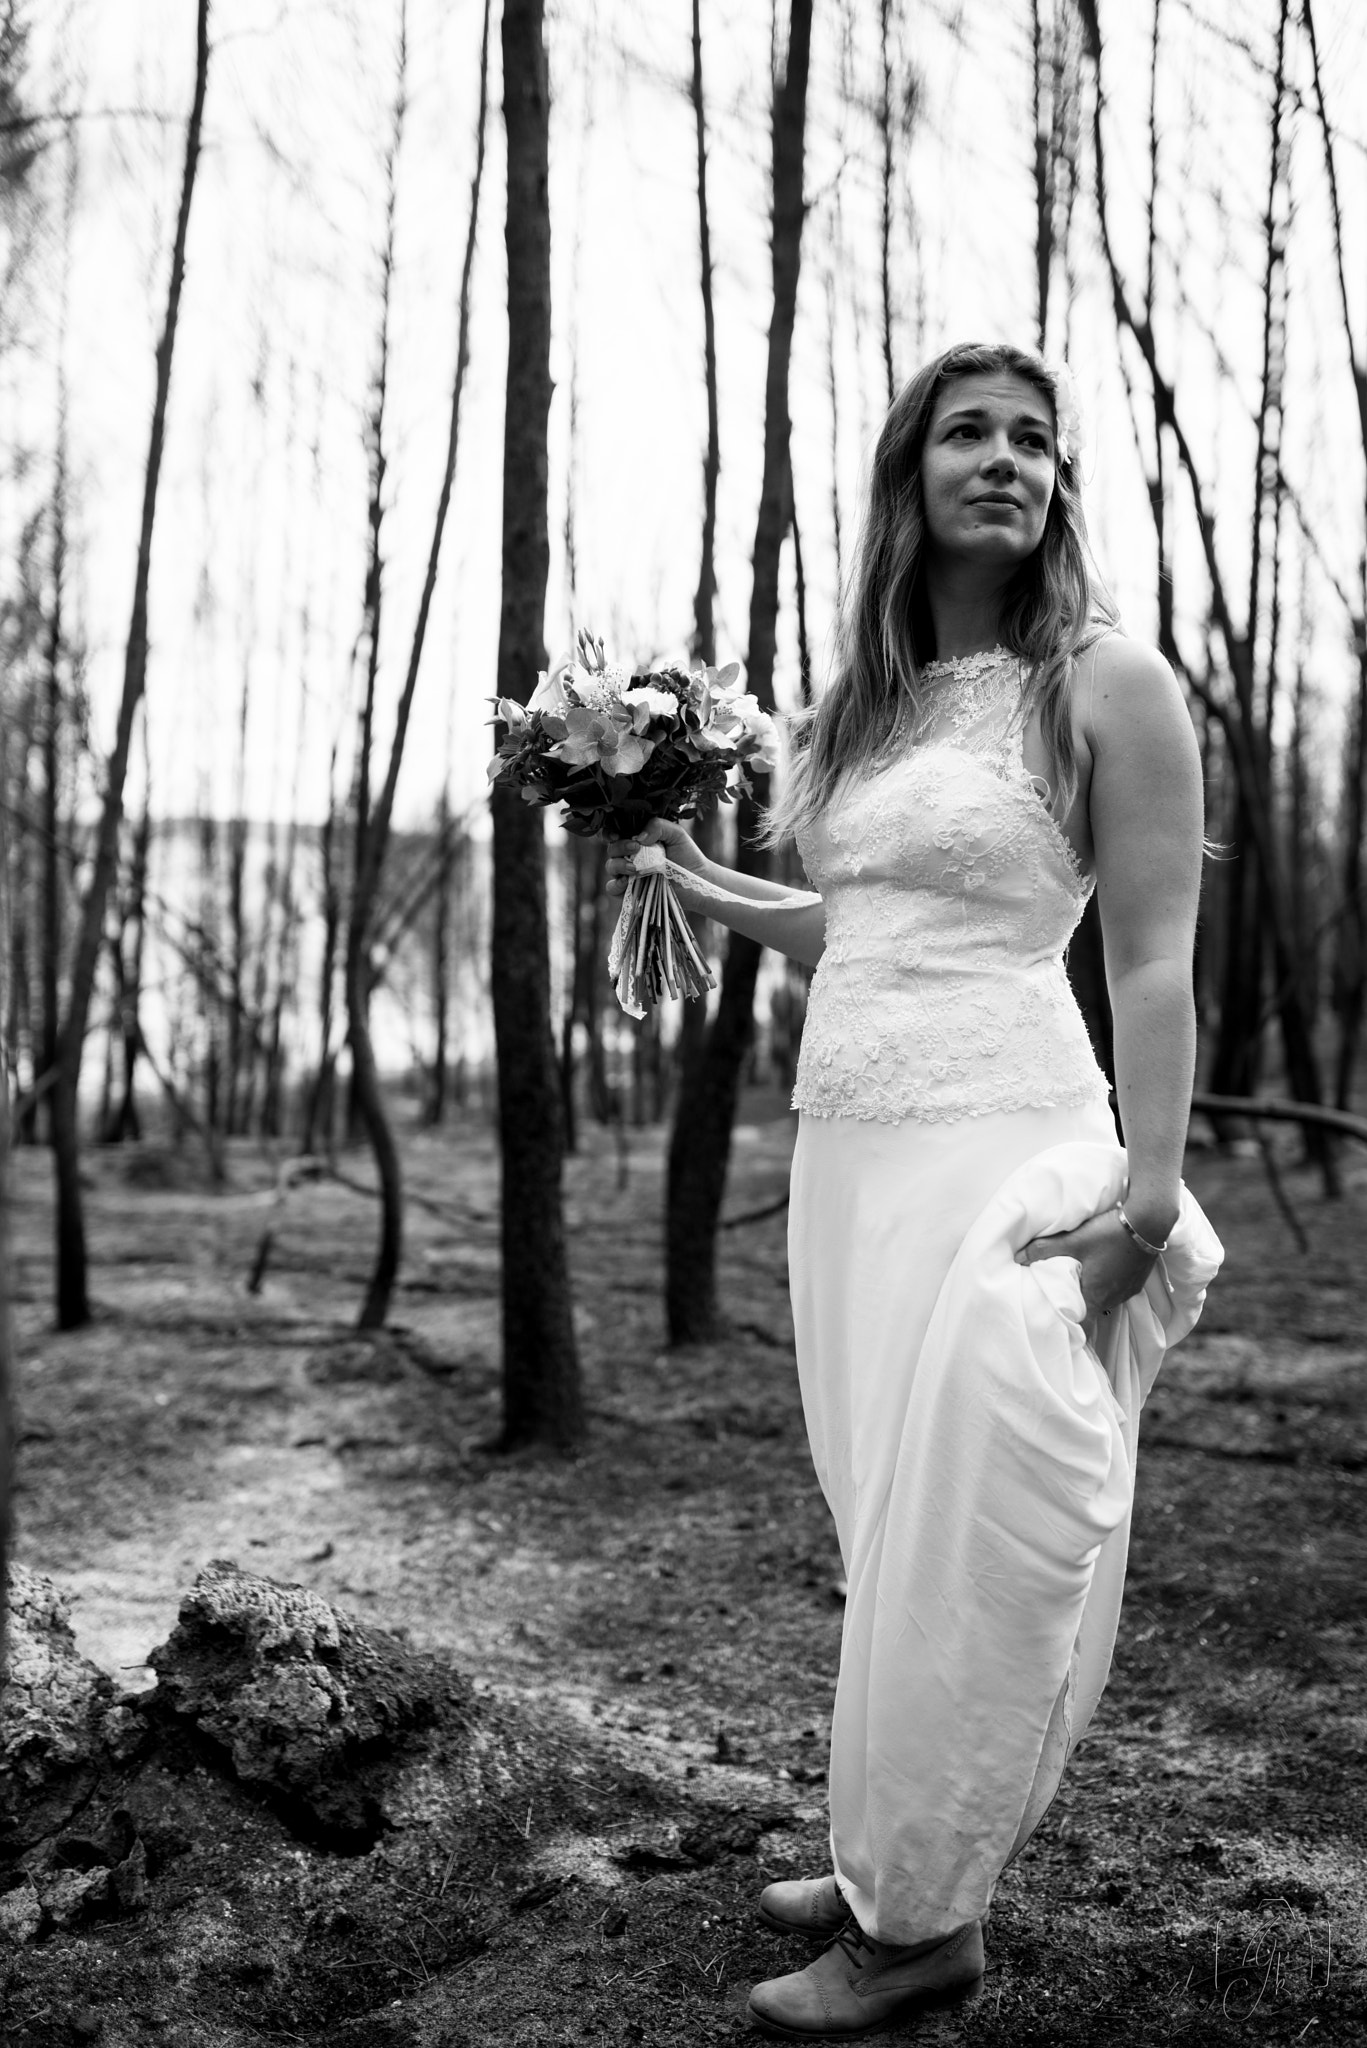 Pentax K-1 sample photo. Bride lost in burnt forest photography